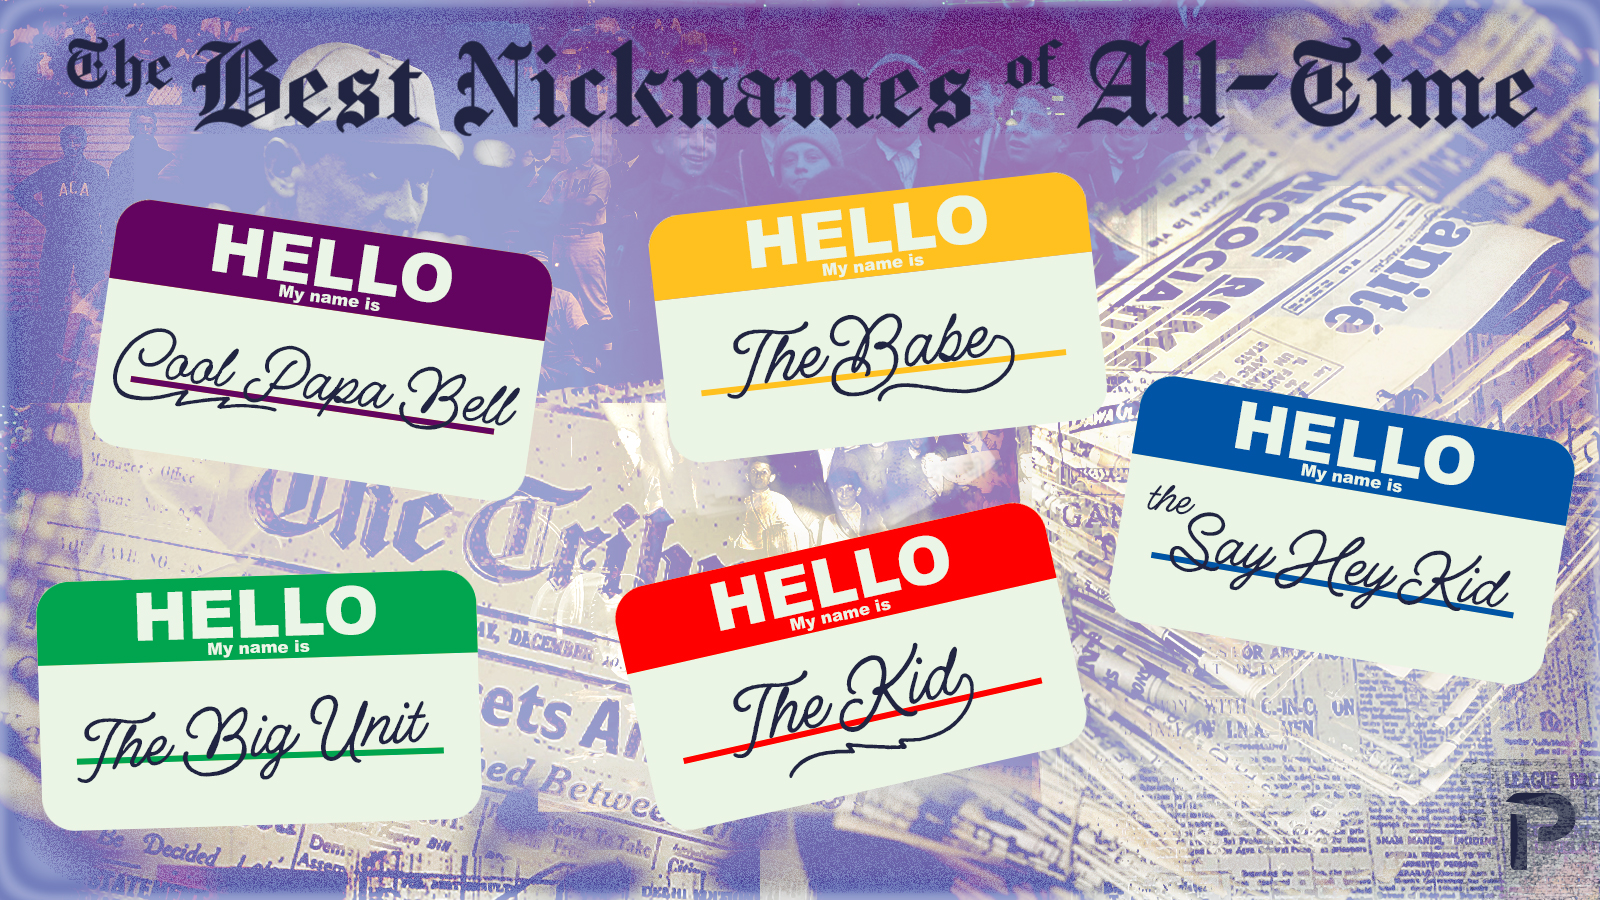 Best Nicknames of All Time